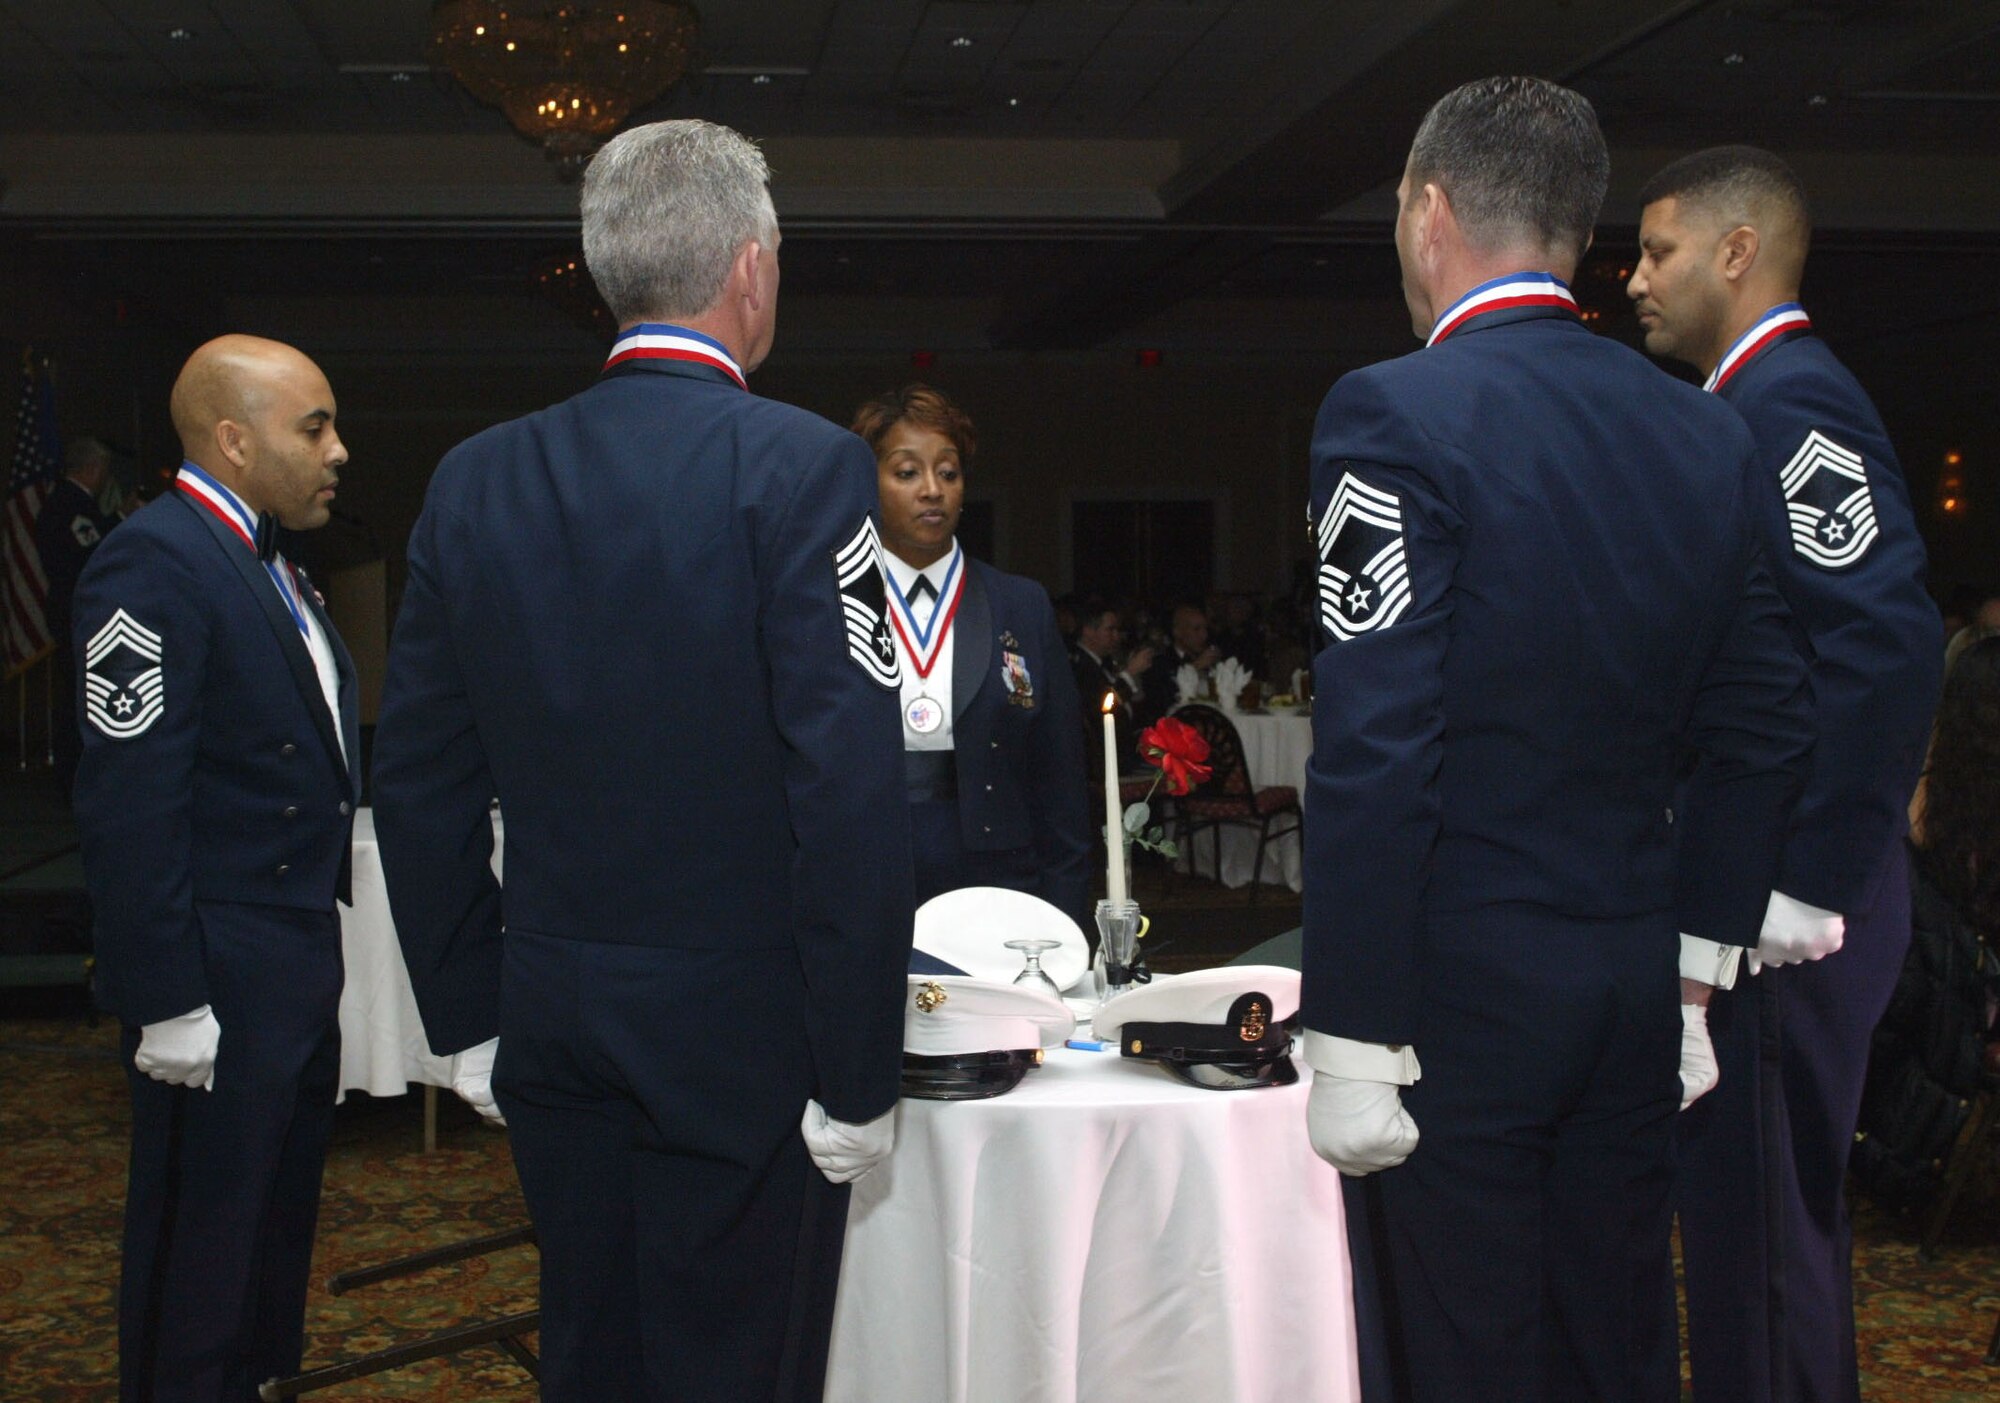 Chief Master Sgts Duren T. Harmon, Sandra A Wright, Howard C. Lee III, James R. Claffey and Wendell L. Peacock perform the POW/MIA dedication at the 2008 Dobbins Air Reserve Base Chiefs Induction Ceremony on Jan 5.  Fourteen inductees were honored as the Dobbins Chiefs Group hosted its sixth biannual induction ceremony at the Marietta Conference Center & Resort.  The inductees are military members who were promoted to the rank of chief master sergeant over the past year.  It is the service?s highest enlisted rank.(U.S. Air Force photo/Don Peek)